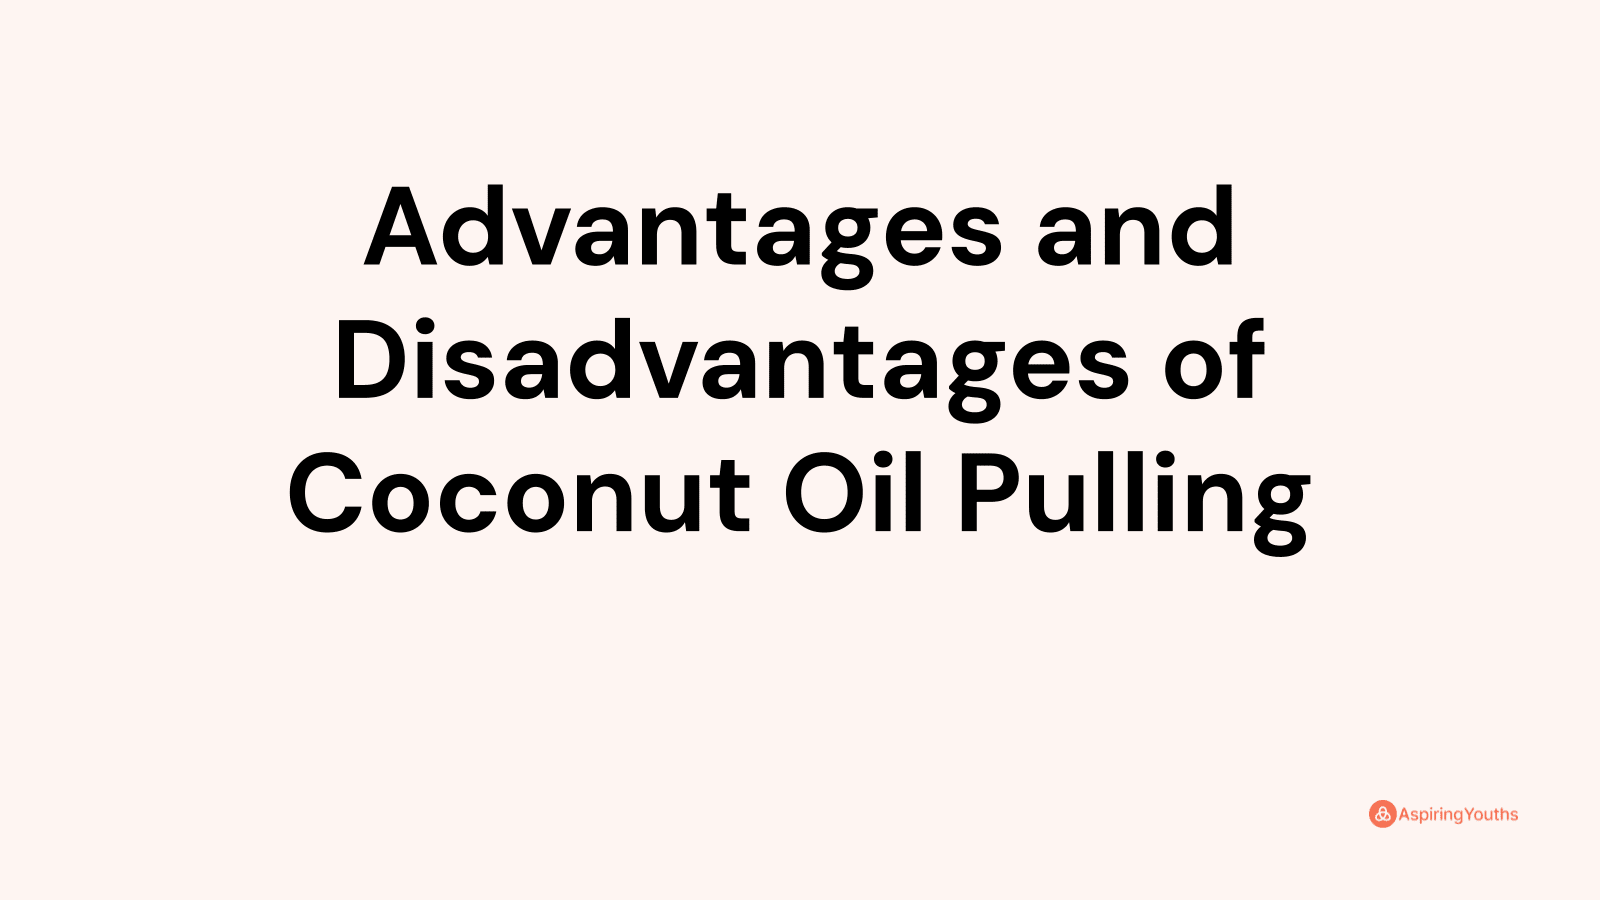 Advantages and disadvantages of Coconut Oil Pulling